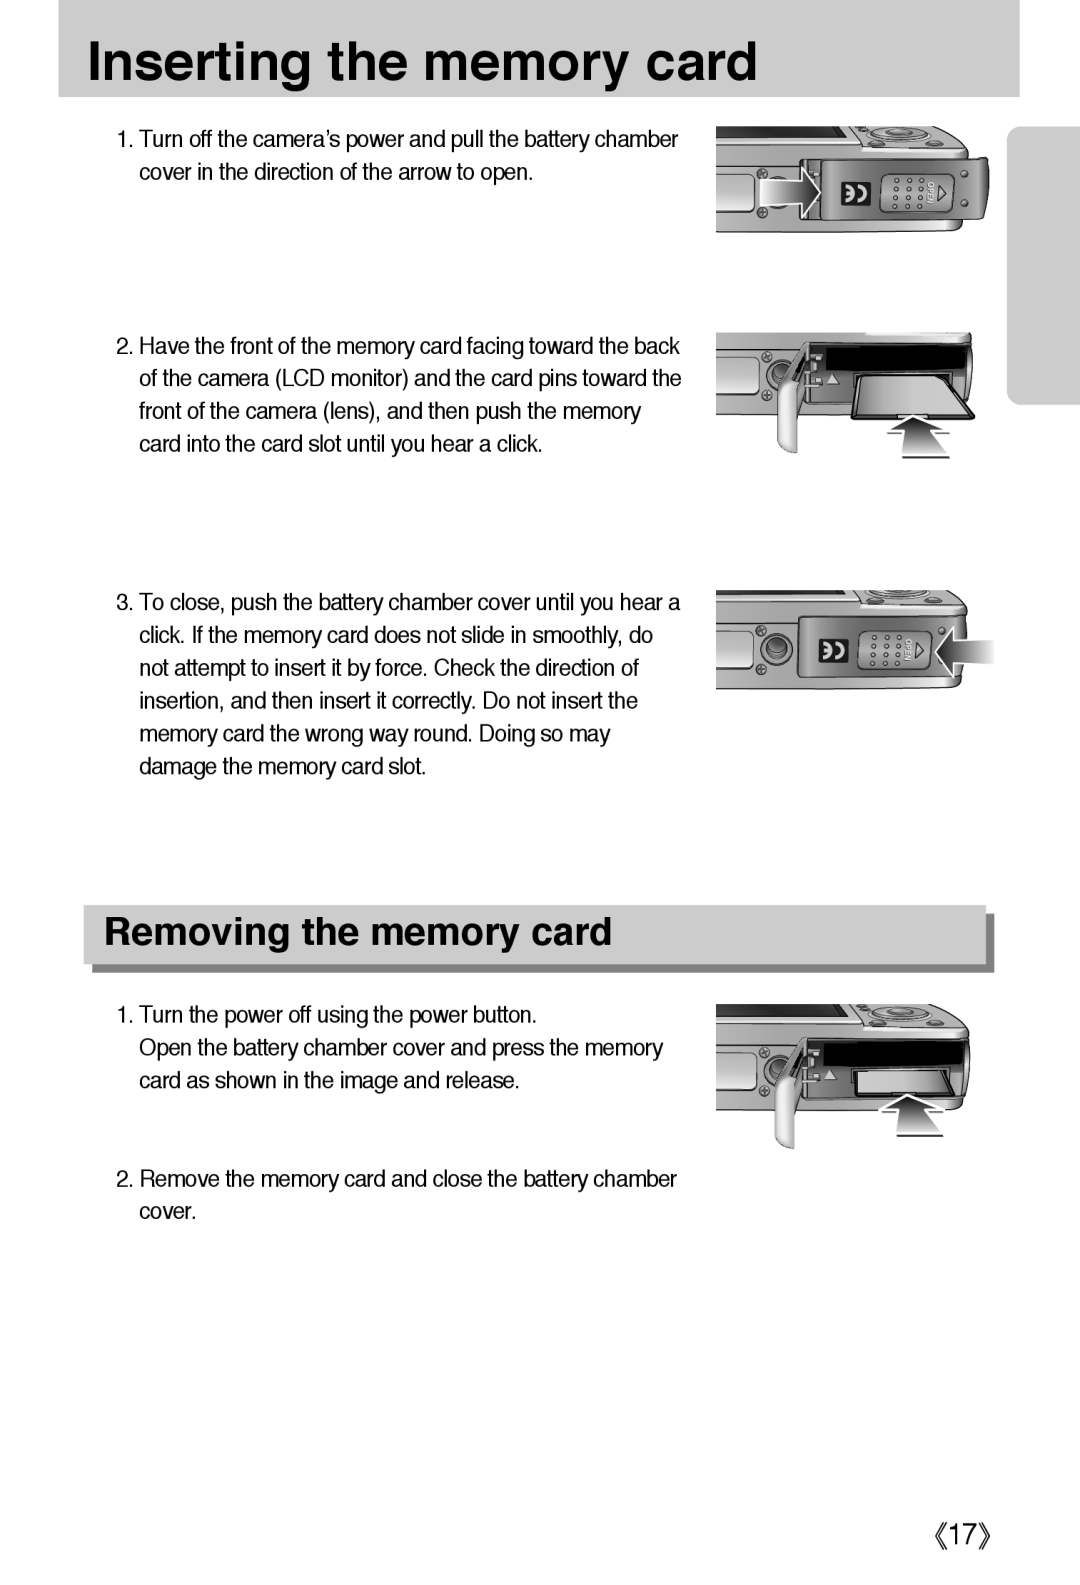 Samsung L50 user manual Inserting the memory card, Removing the memory card, 《17》 